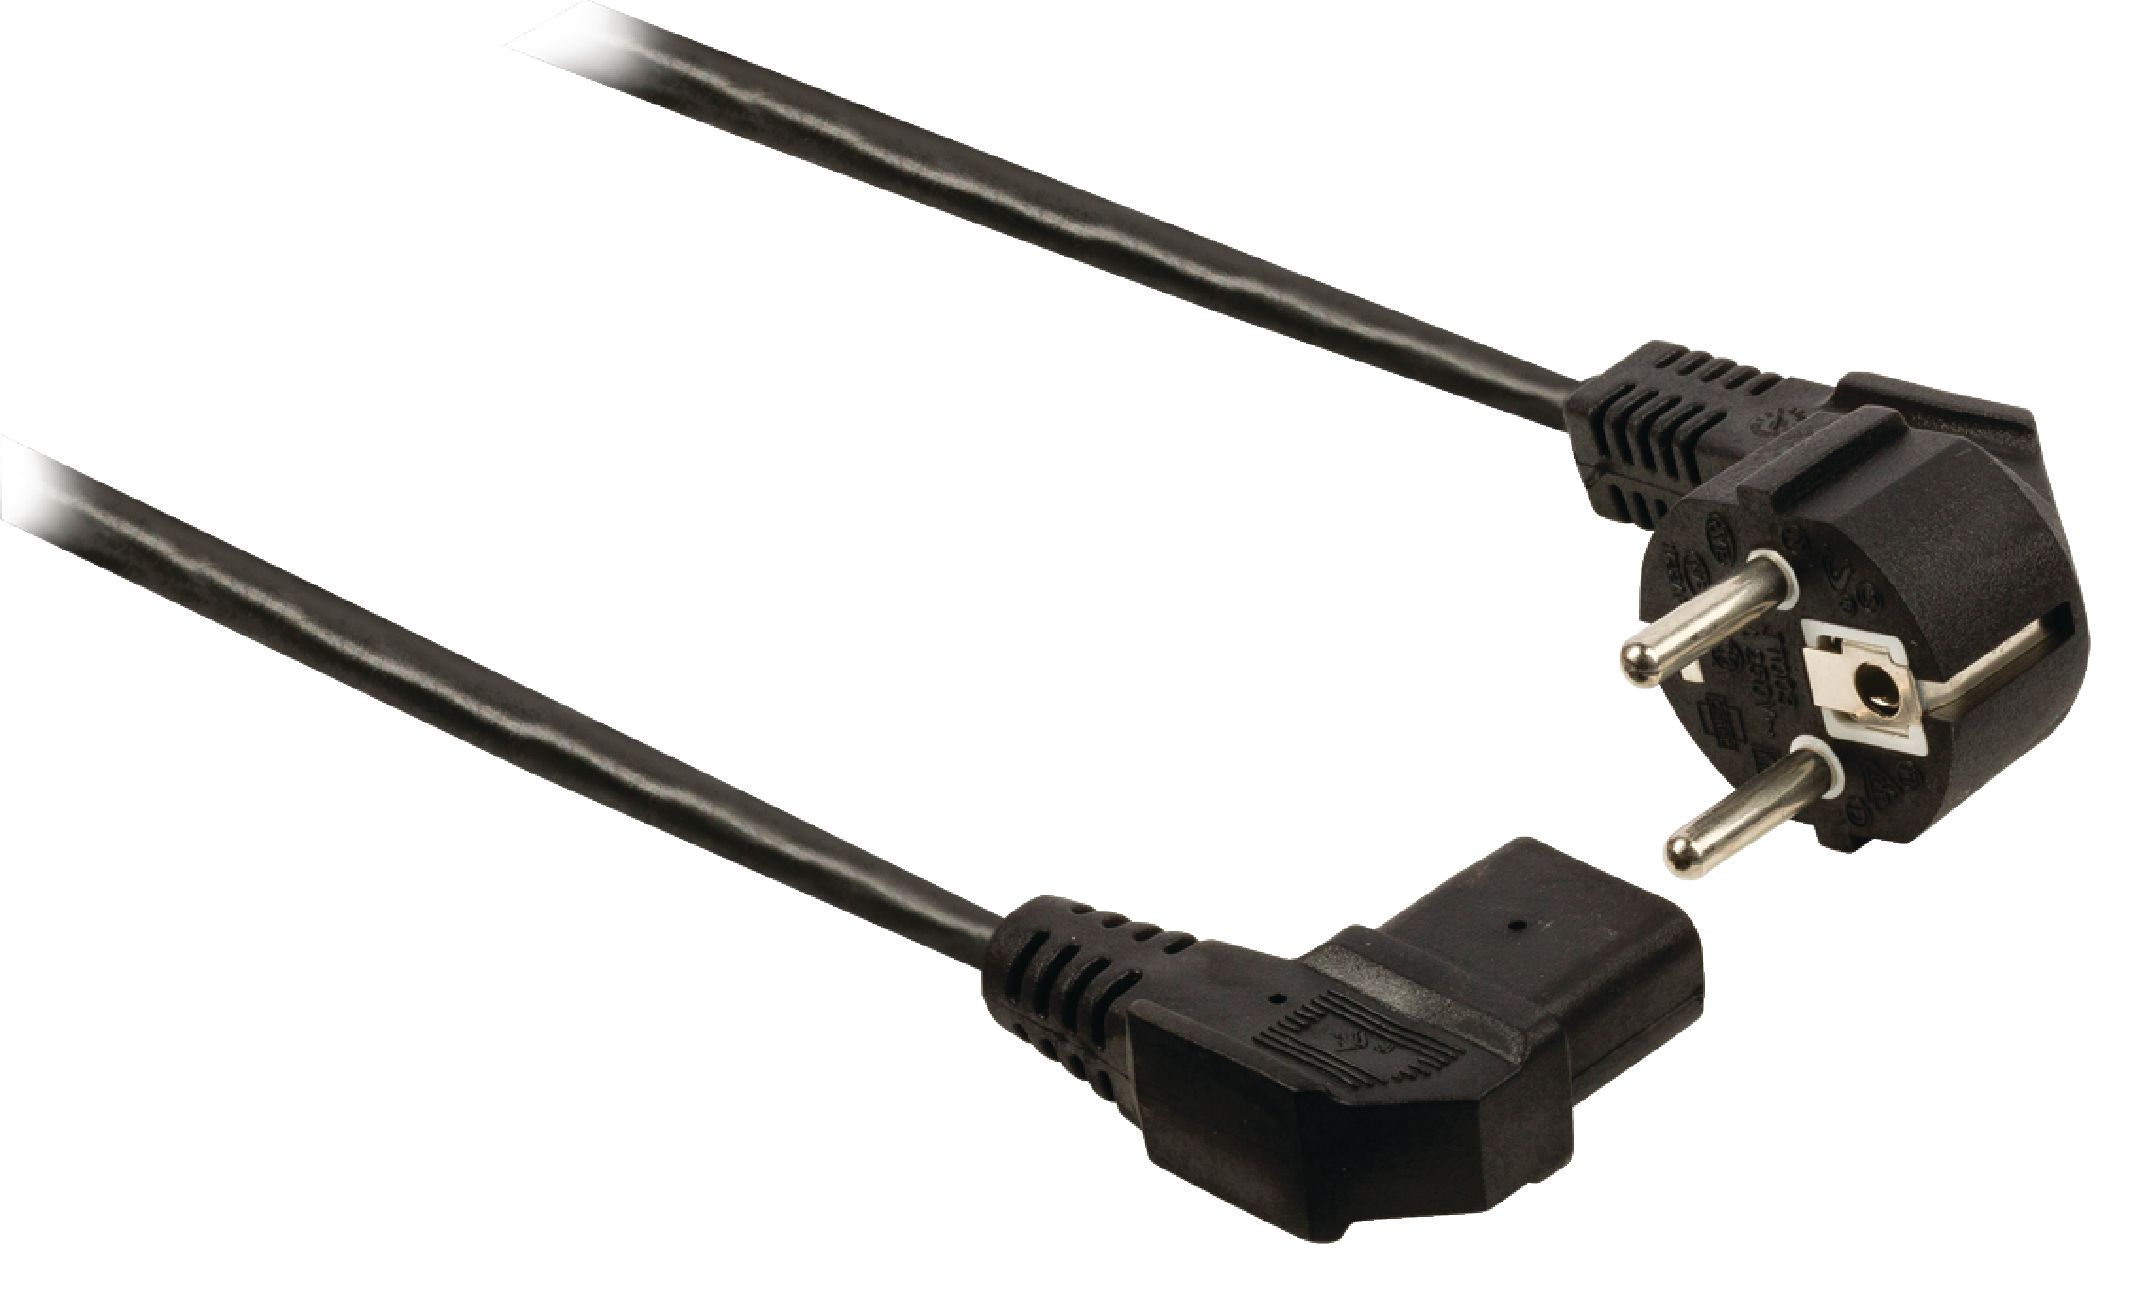 Cable alimentation coude